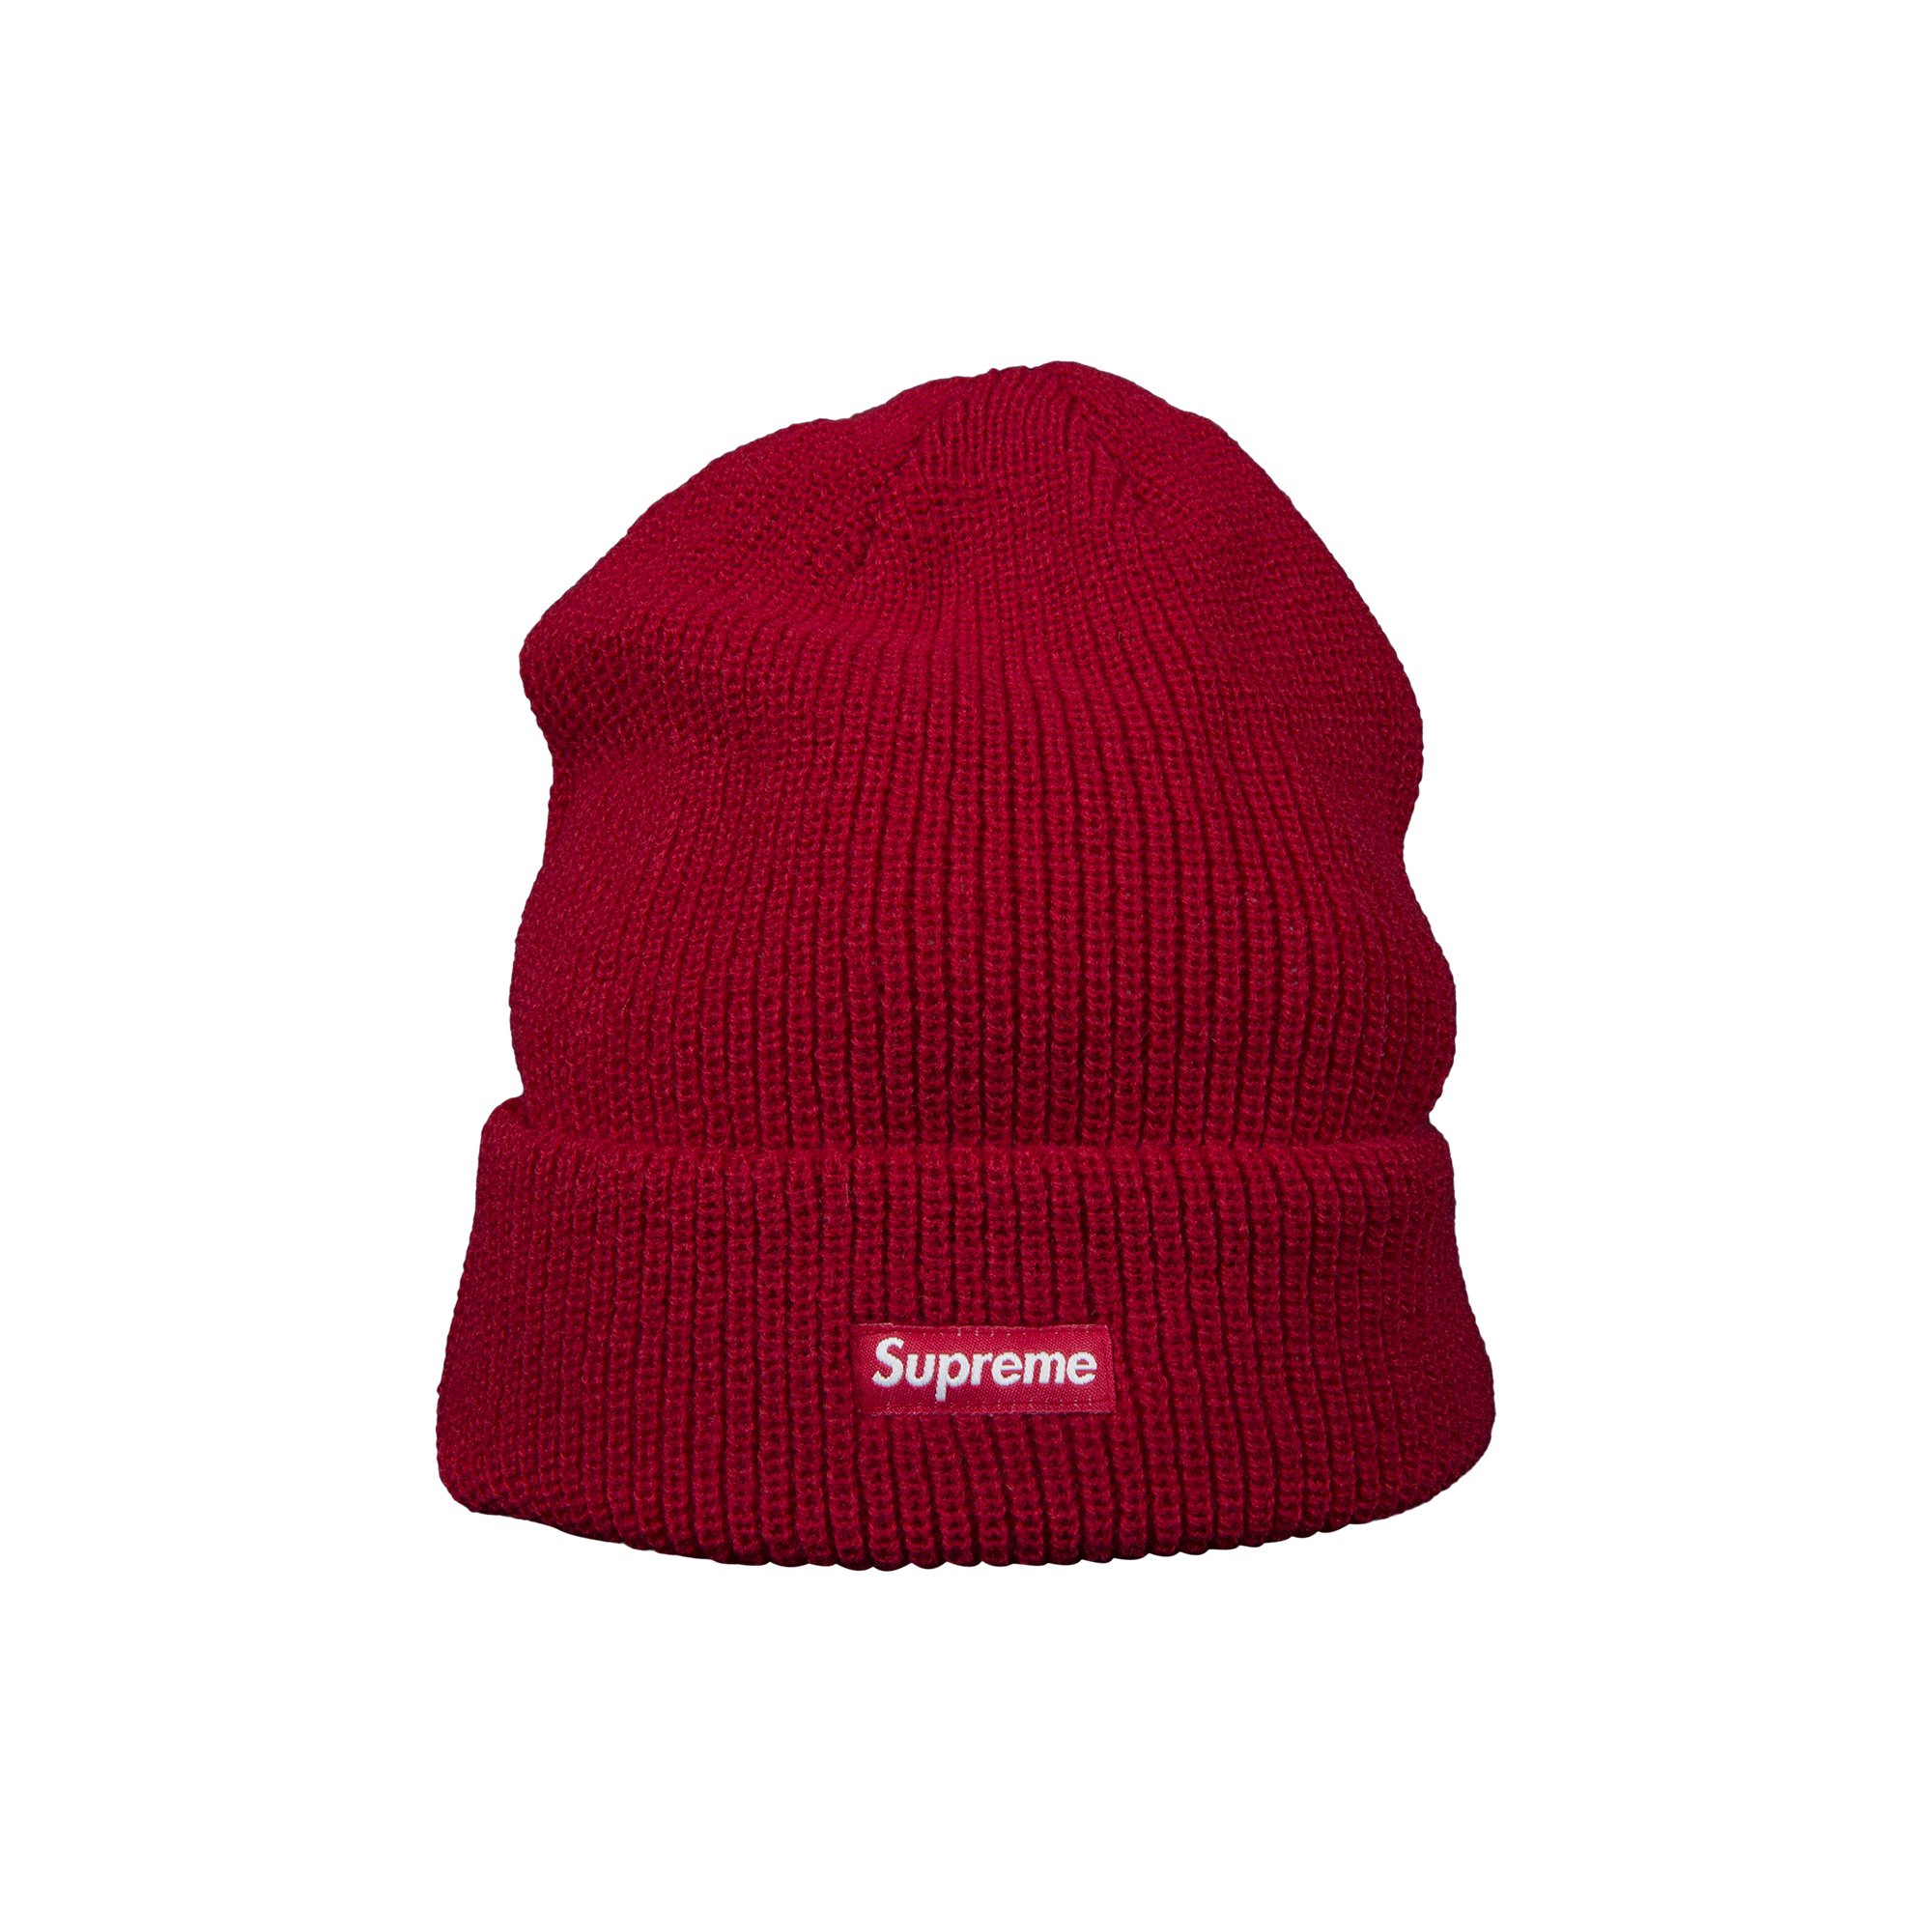 Buy Supreme Gore-Tex Beanie 'Red' - FW18BN63 RED | GOAT